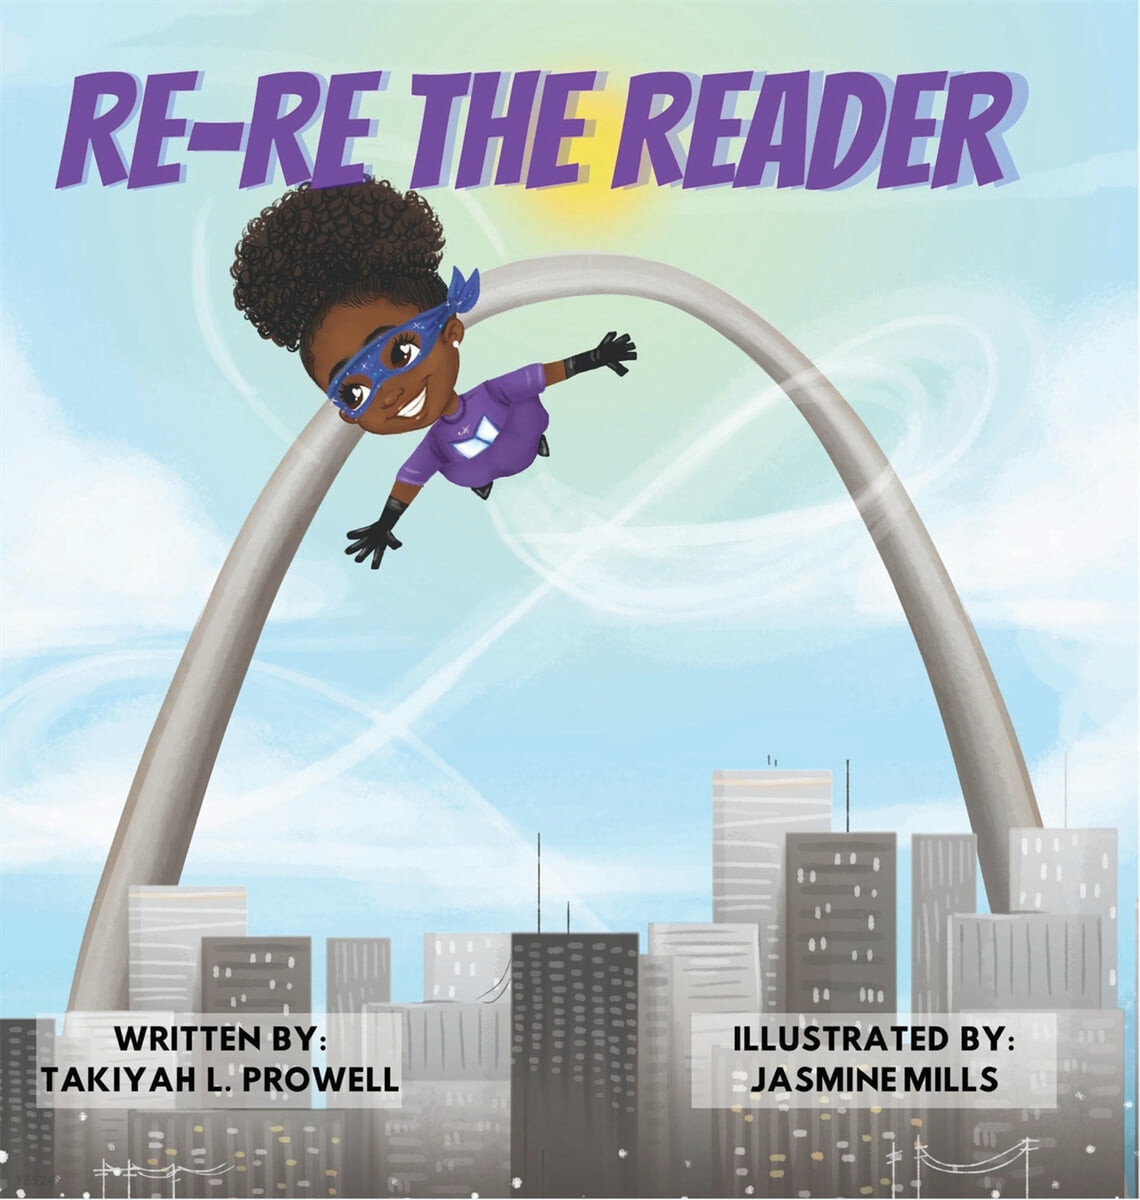 Re-Re the Reader